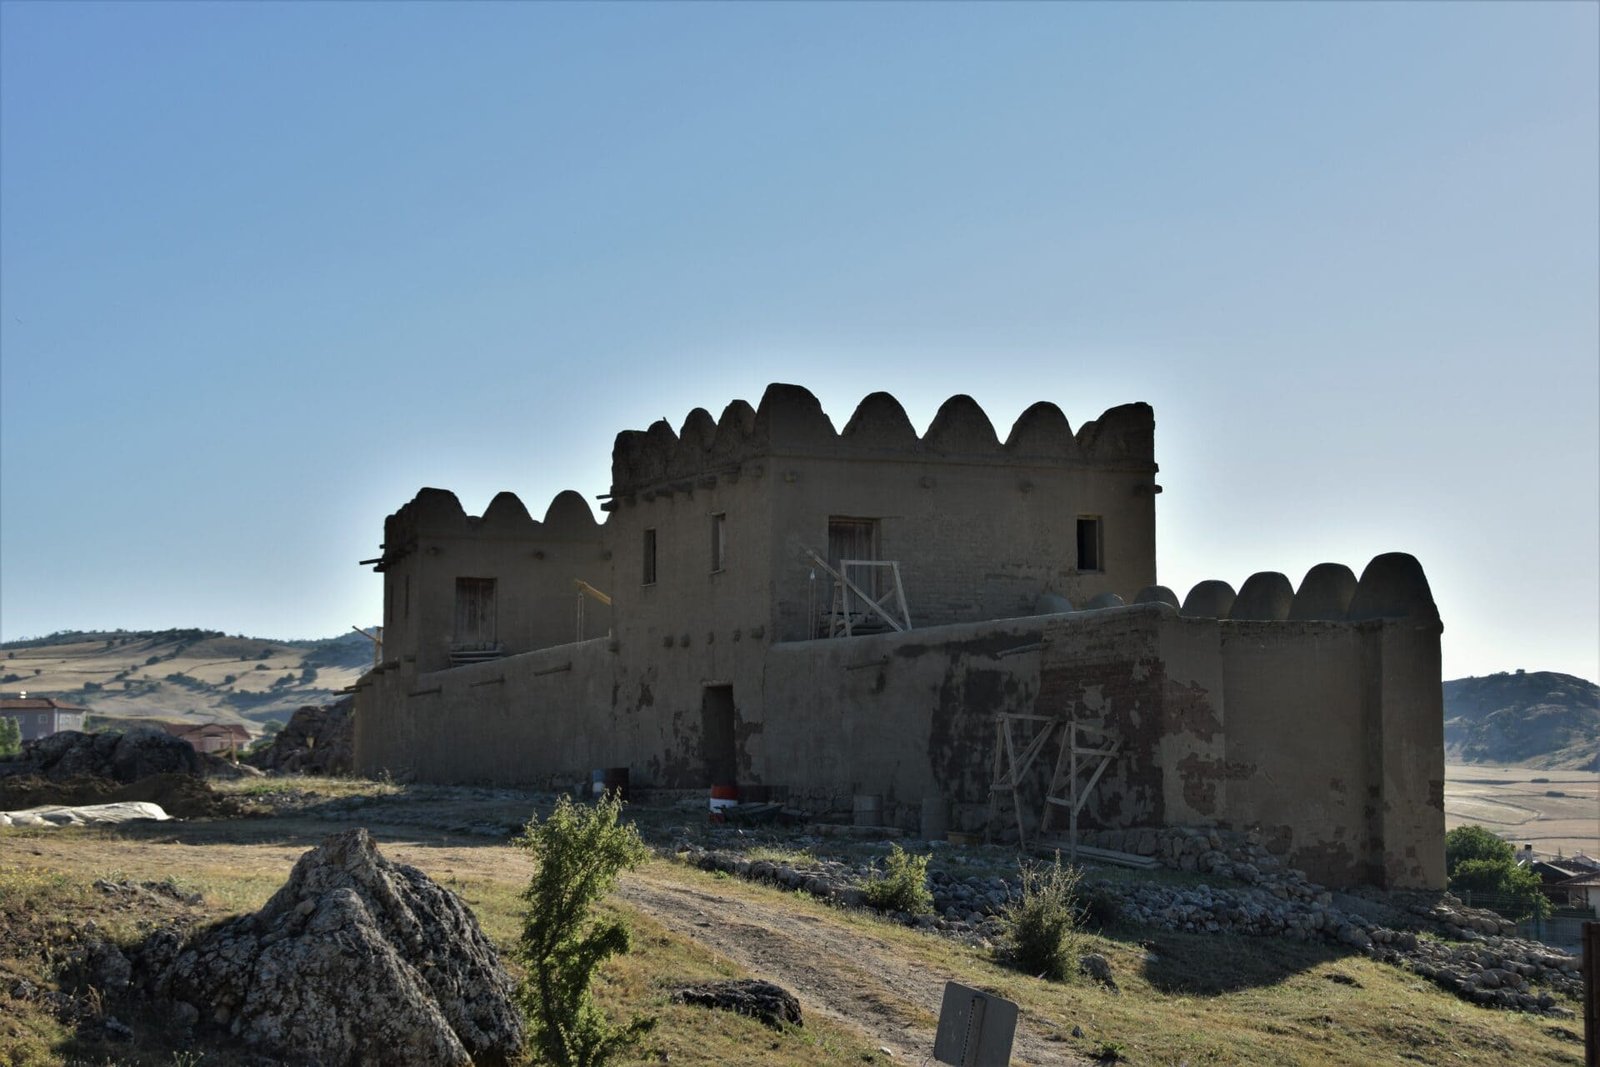 a reconstructed part of the old mudbrick city wall of Hattusha